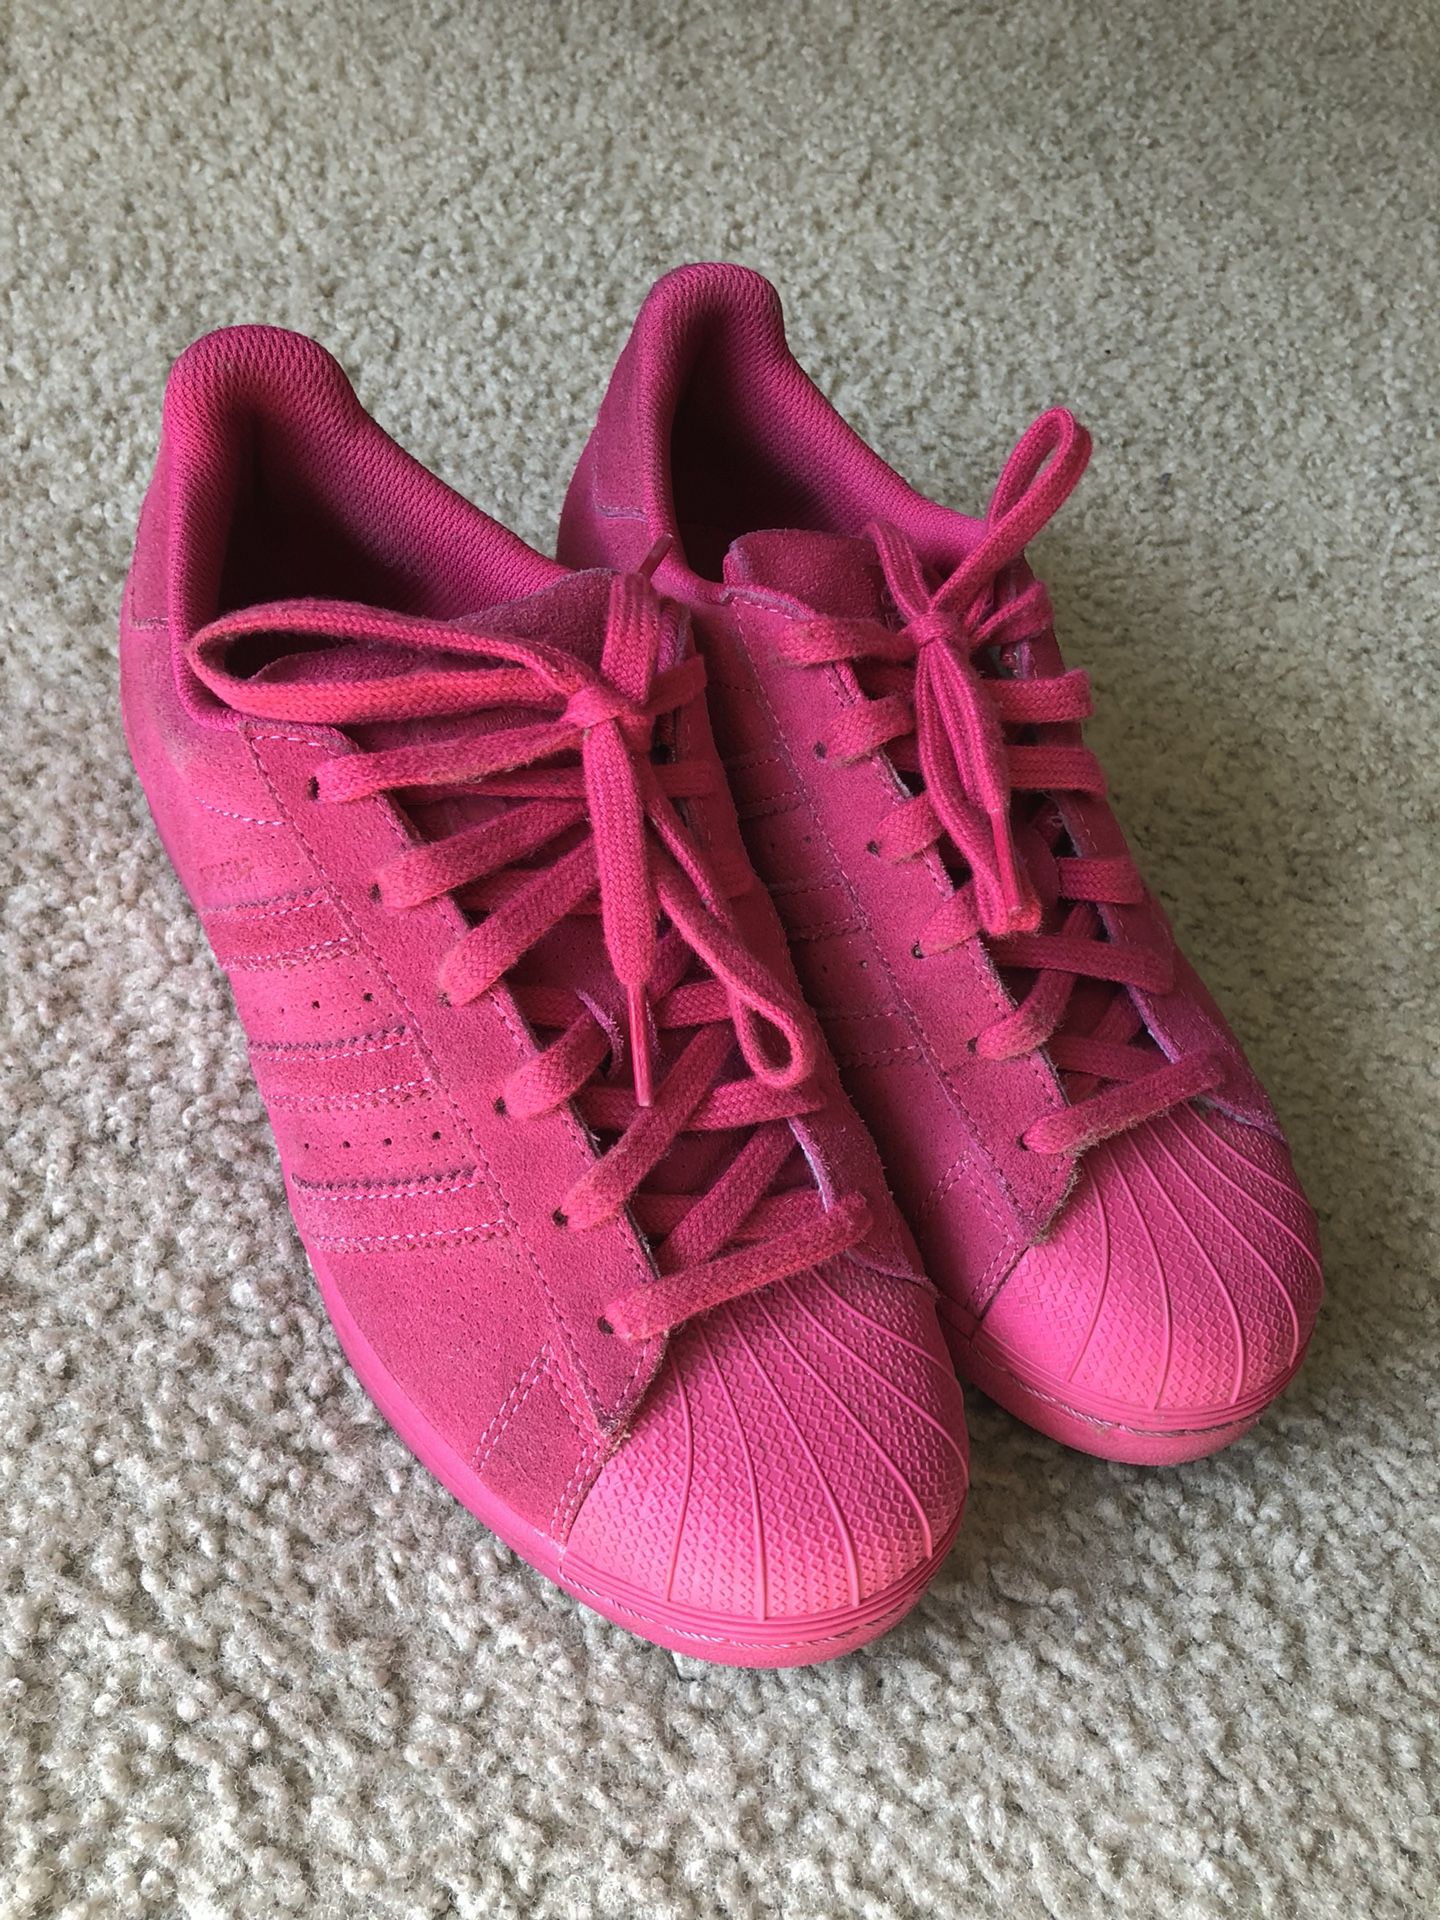 Limited Pink suede adidas size 6